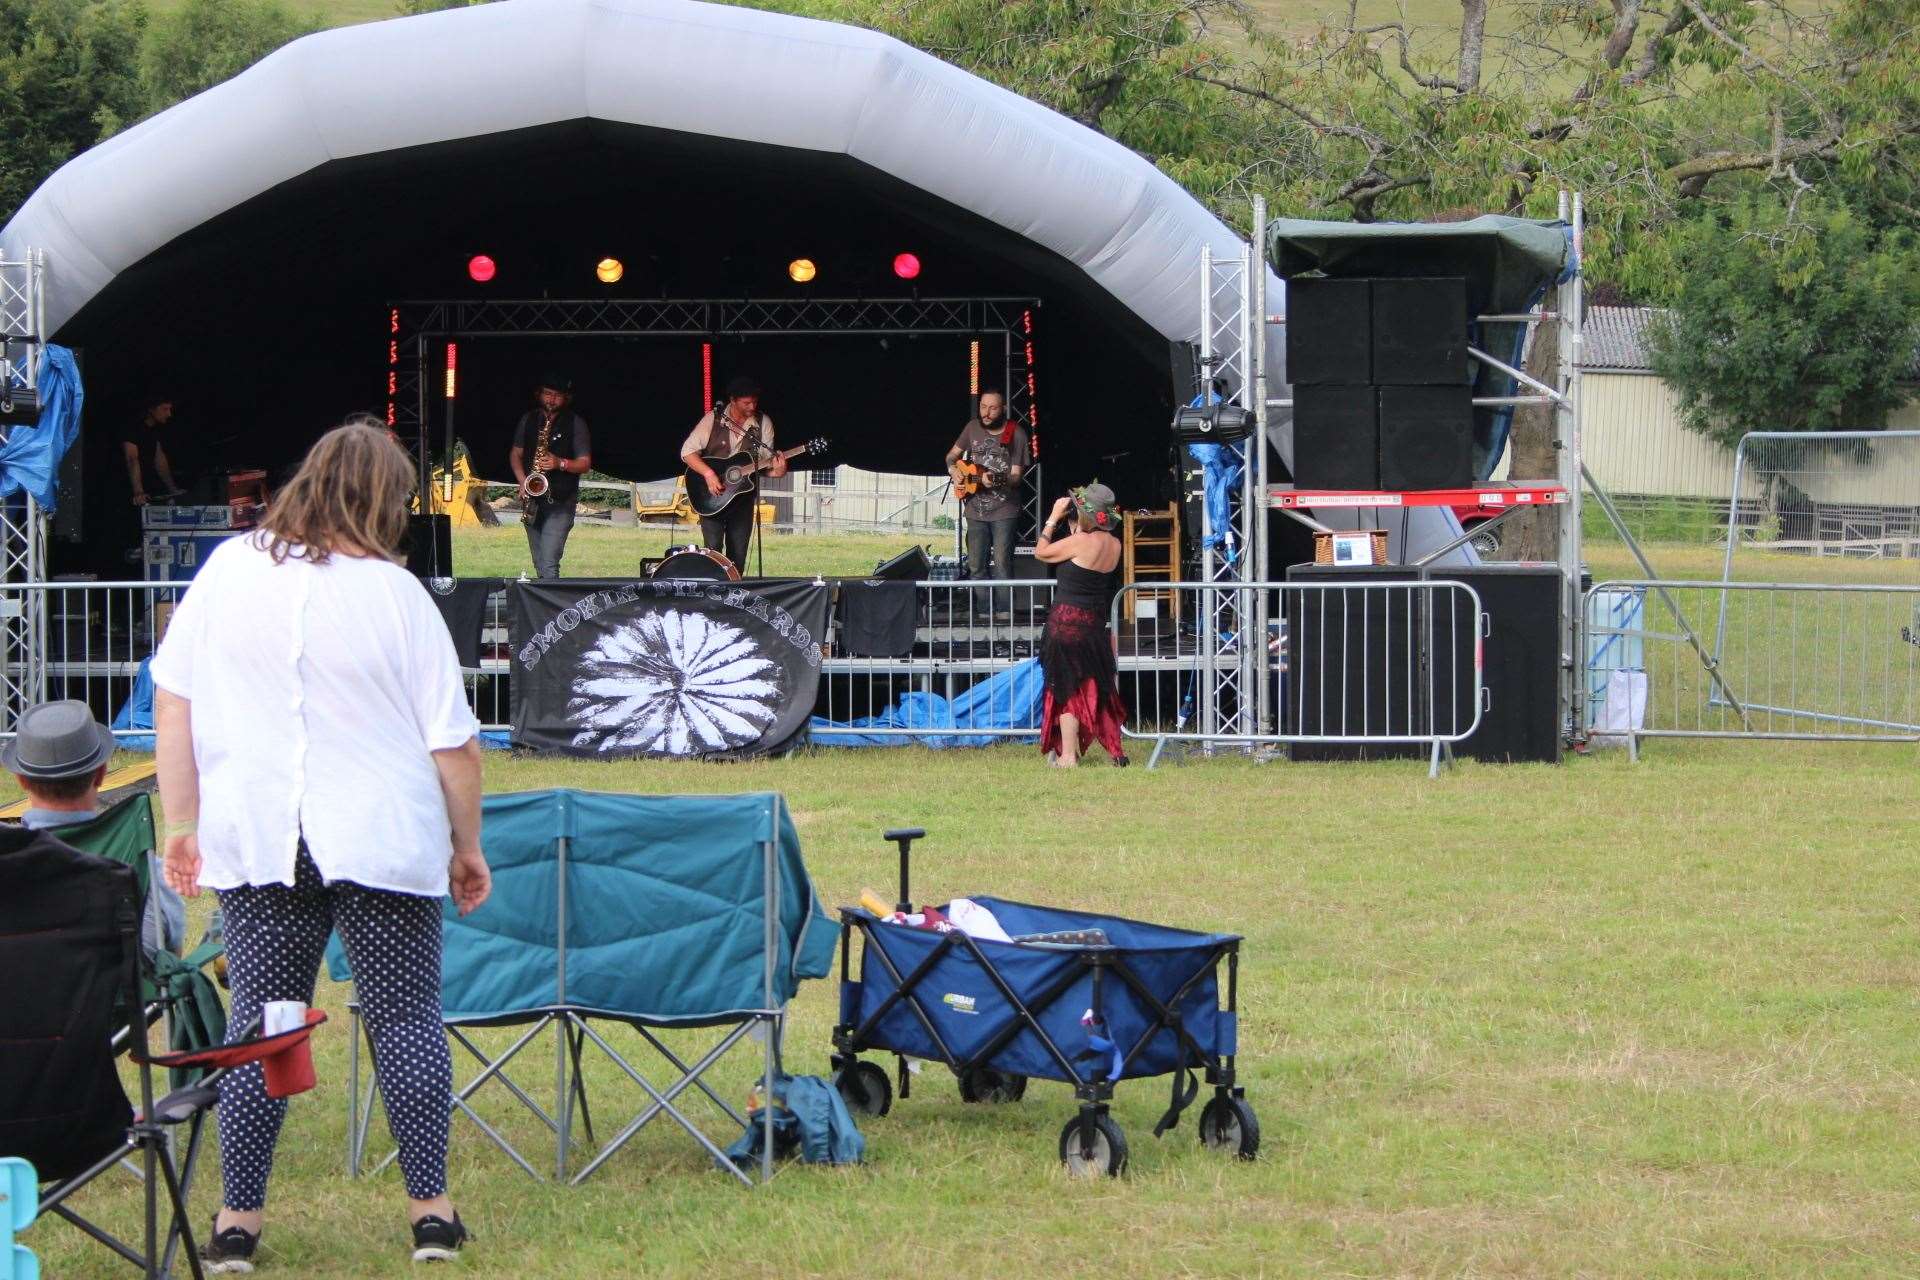 The stage at the Chickenstock music festival, Stockbury